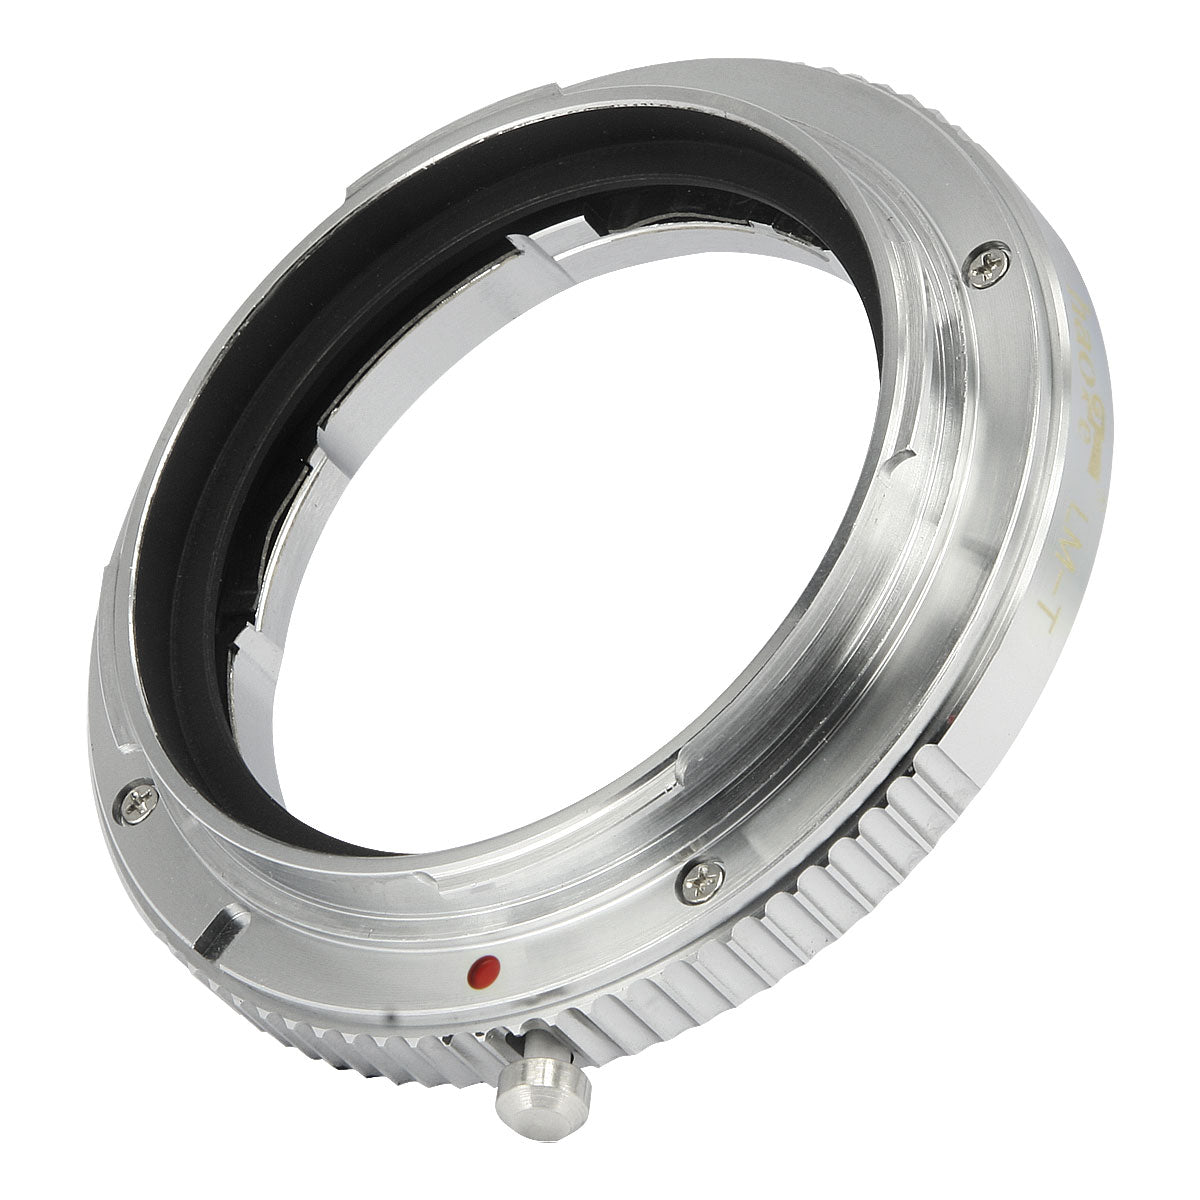 Haoge Manual Lens Mount Adapter for Leica M LM, Zeiss ZM, Voigtlander VM Lens to Leica L Mount Camera such as T , Typ 701 , Typ701 , TL , TL2 , CL (2017) , SL , Typ 601 , Typ601